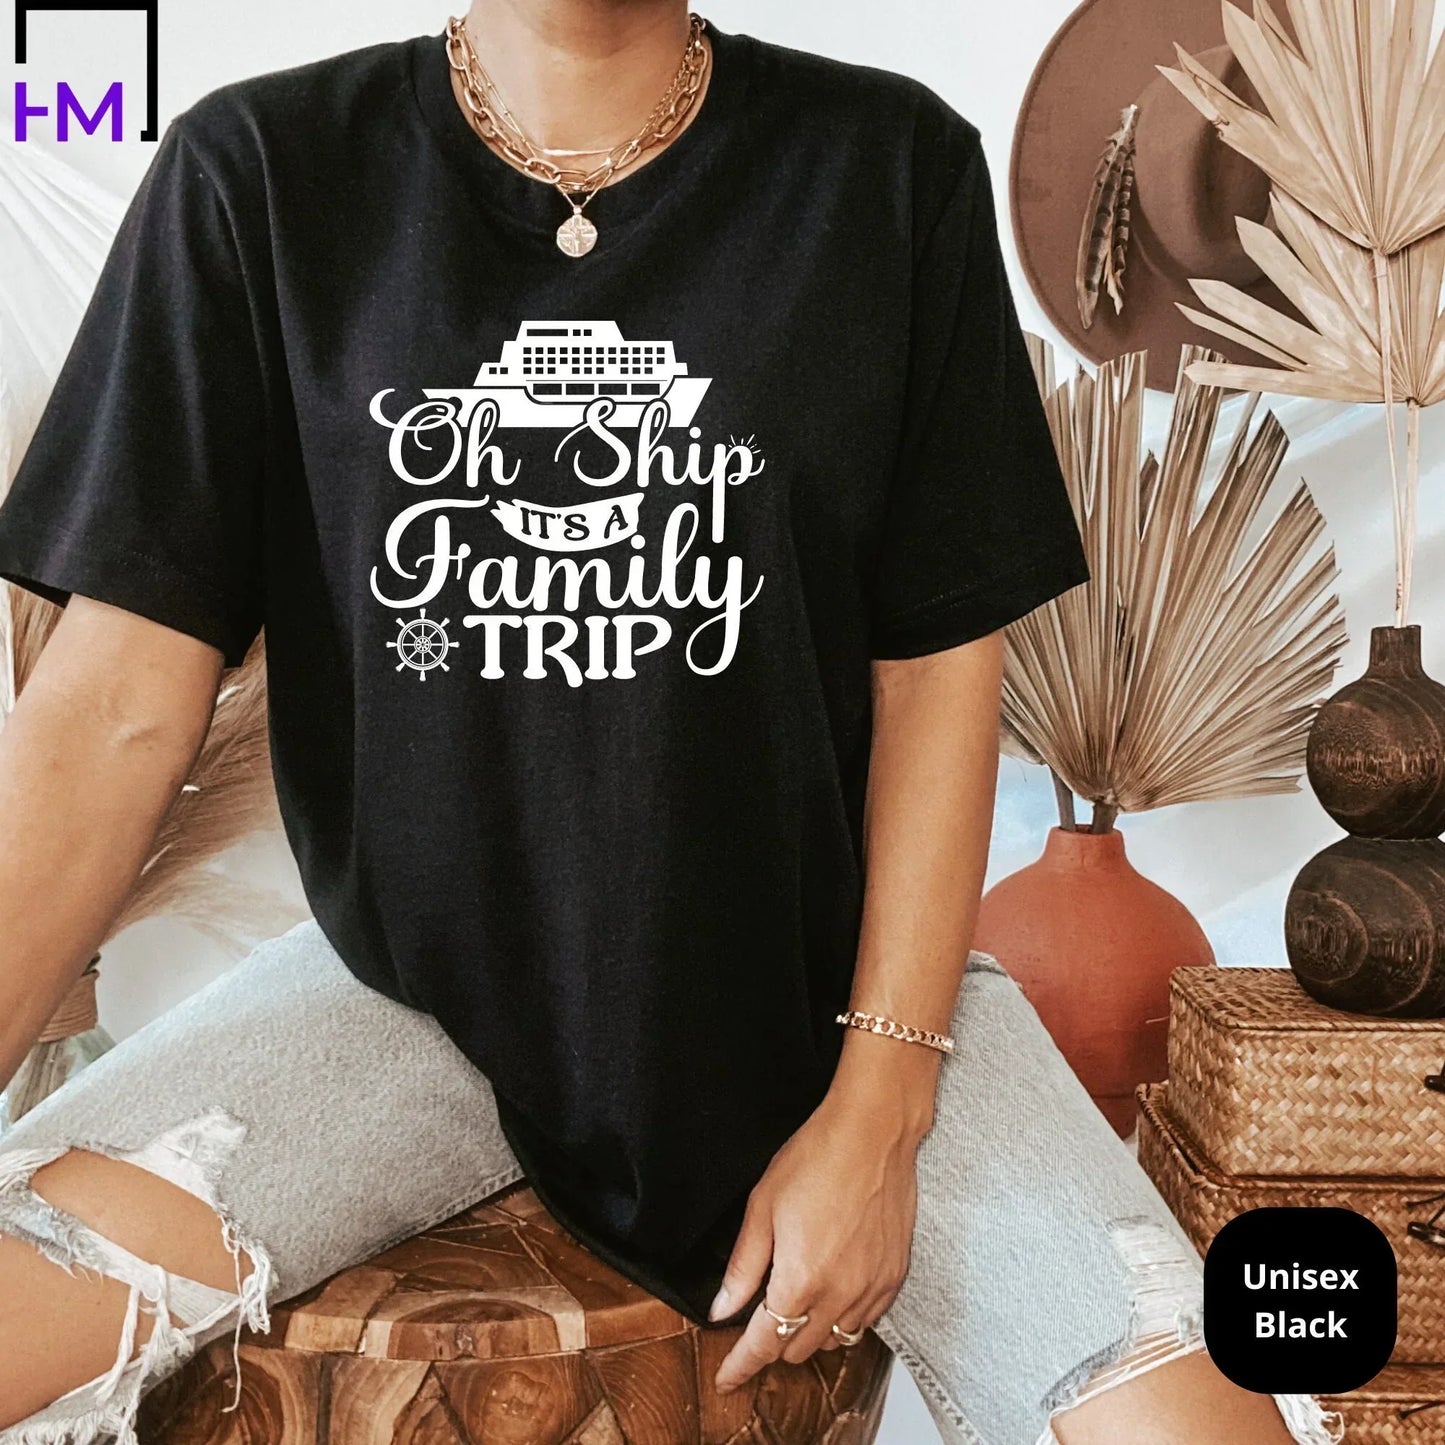 Family Cruise Shirts for Reunions